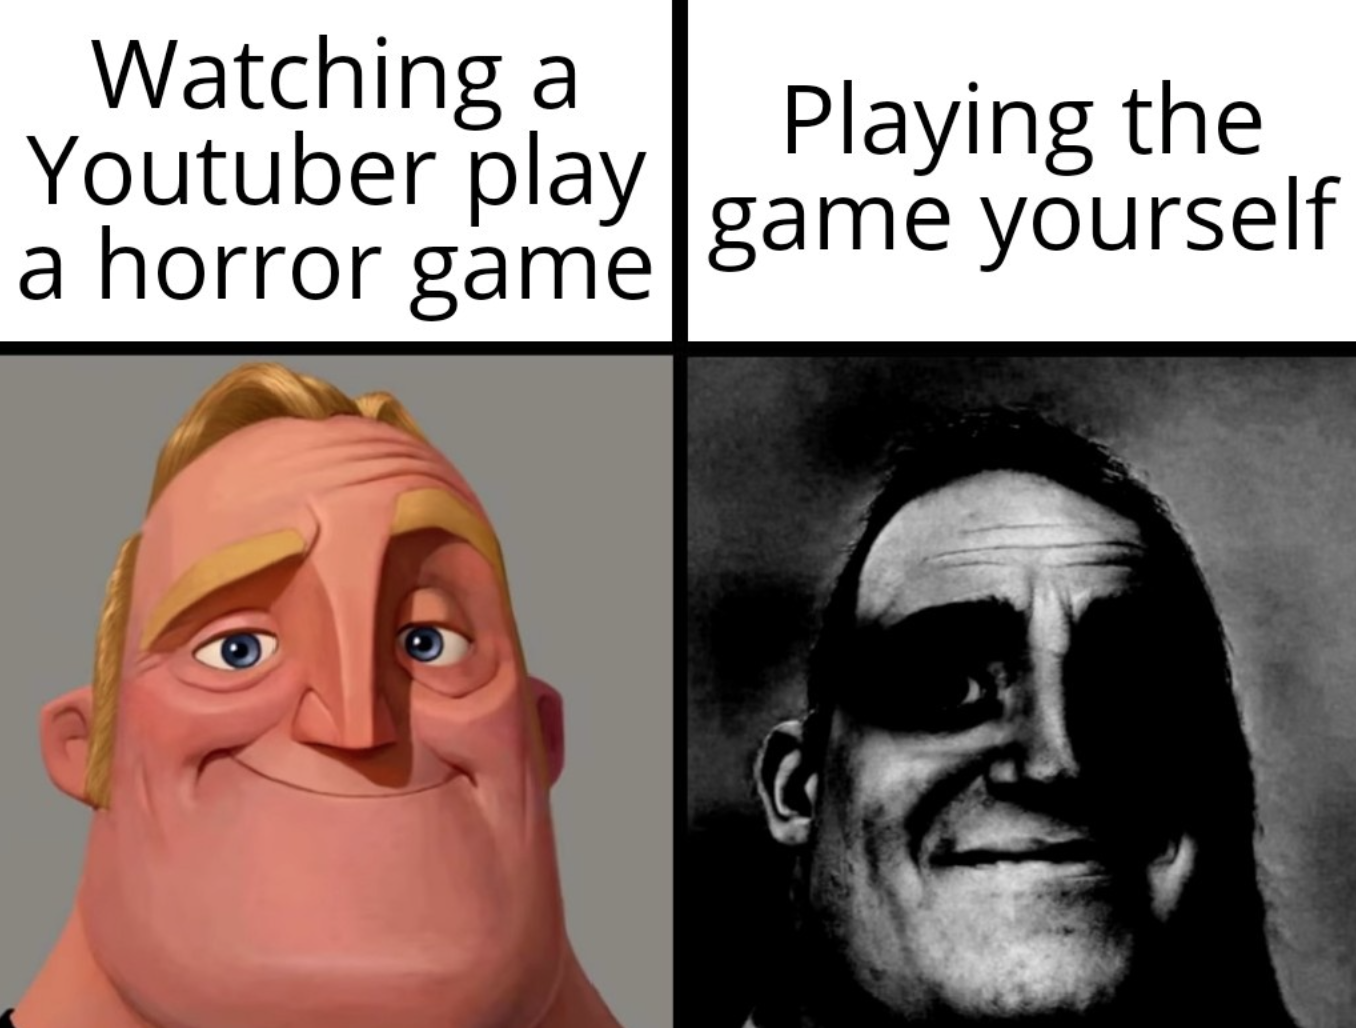 funny gaming memes - dark mr incredible meme template - Watching a Youtuber play Playing the a horror game game yourself